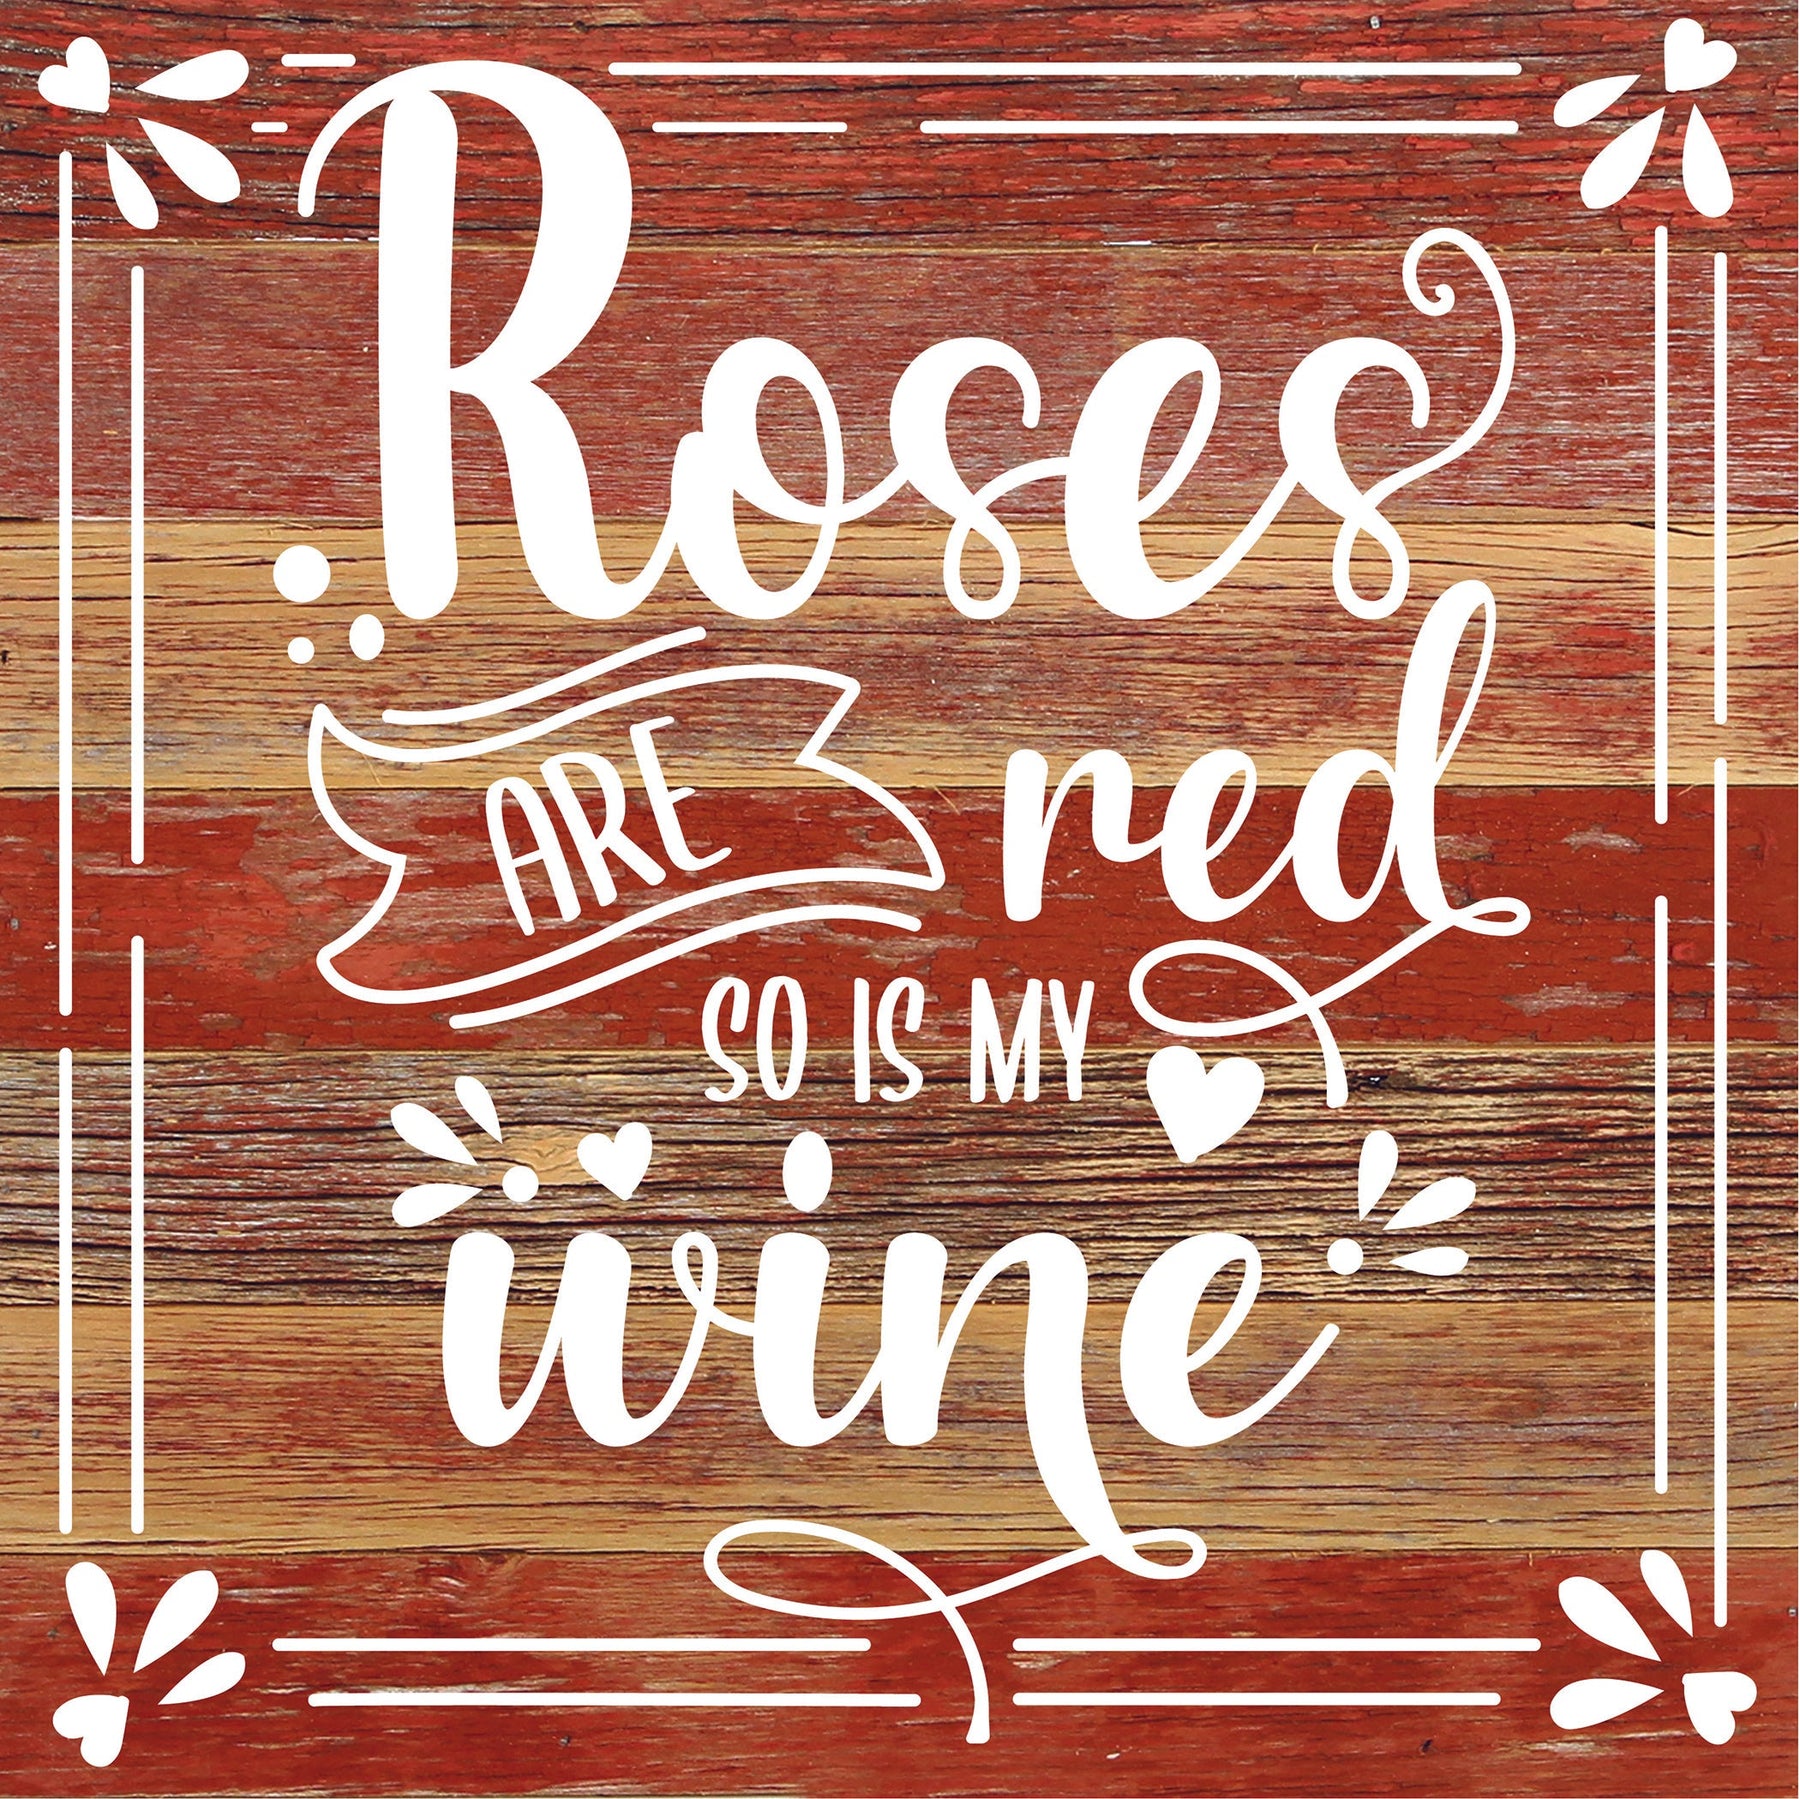 Roses are red so is my wine / 10x10 Reclaimed Wood Sign